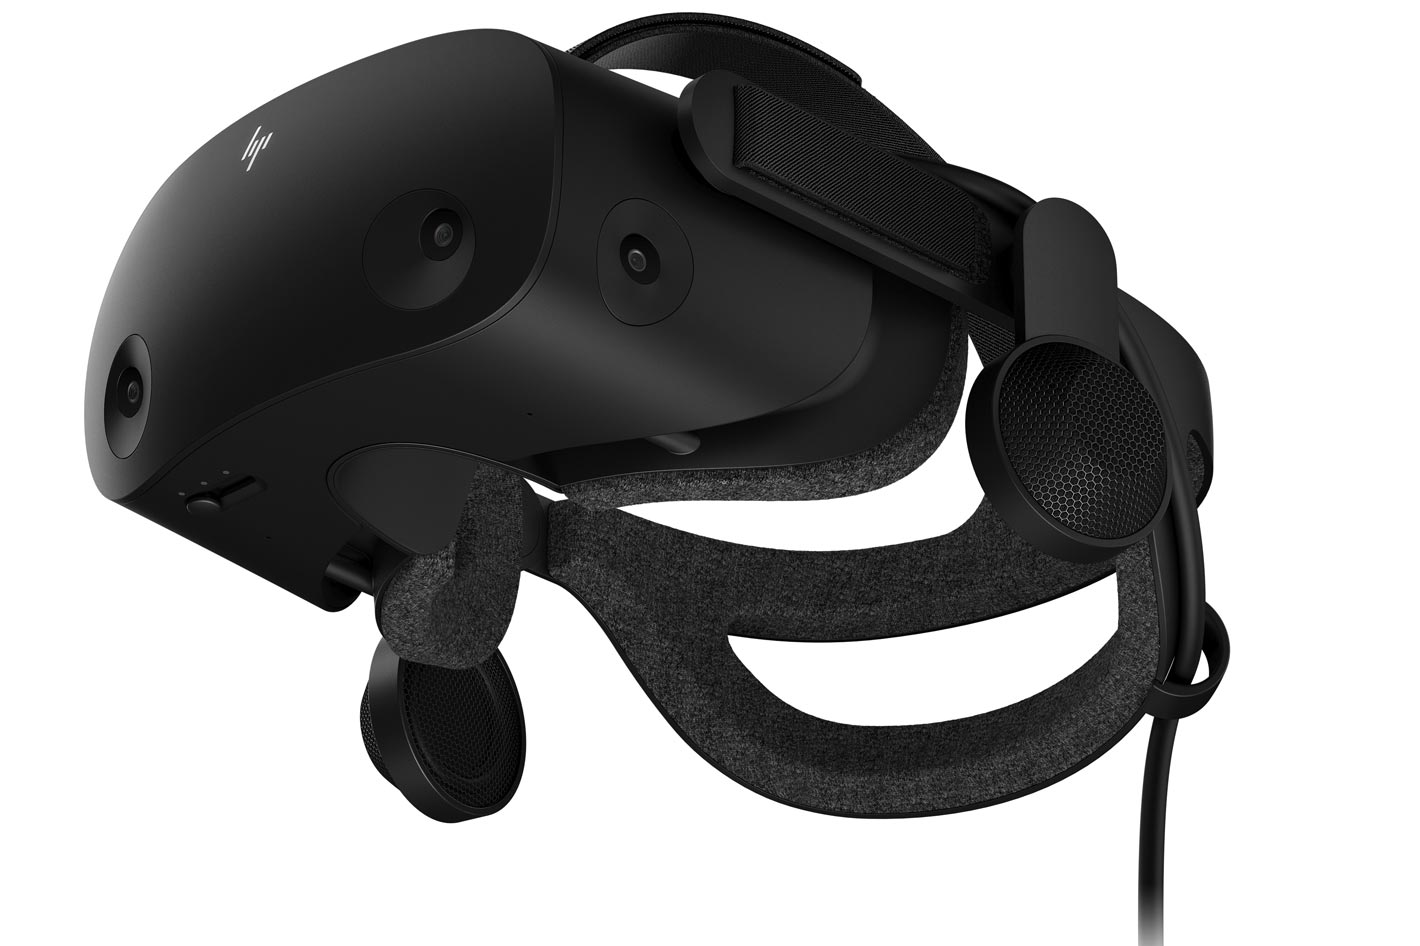 HP Reverb G2: a great Virtual Reality headset… when it works